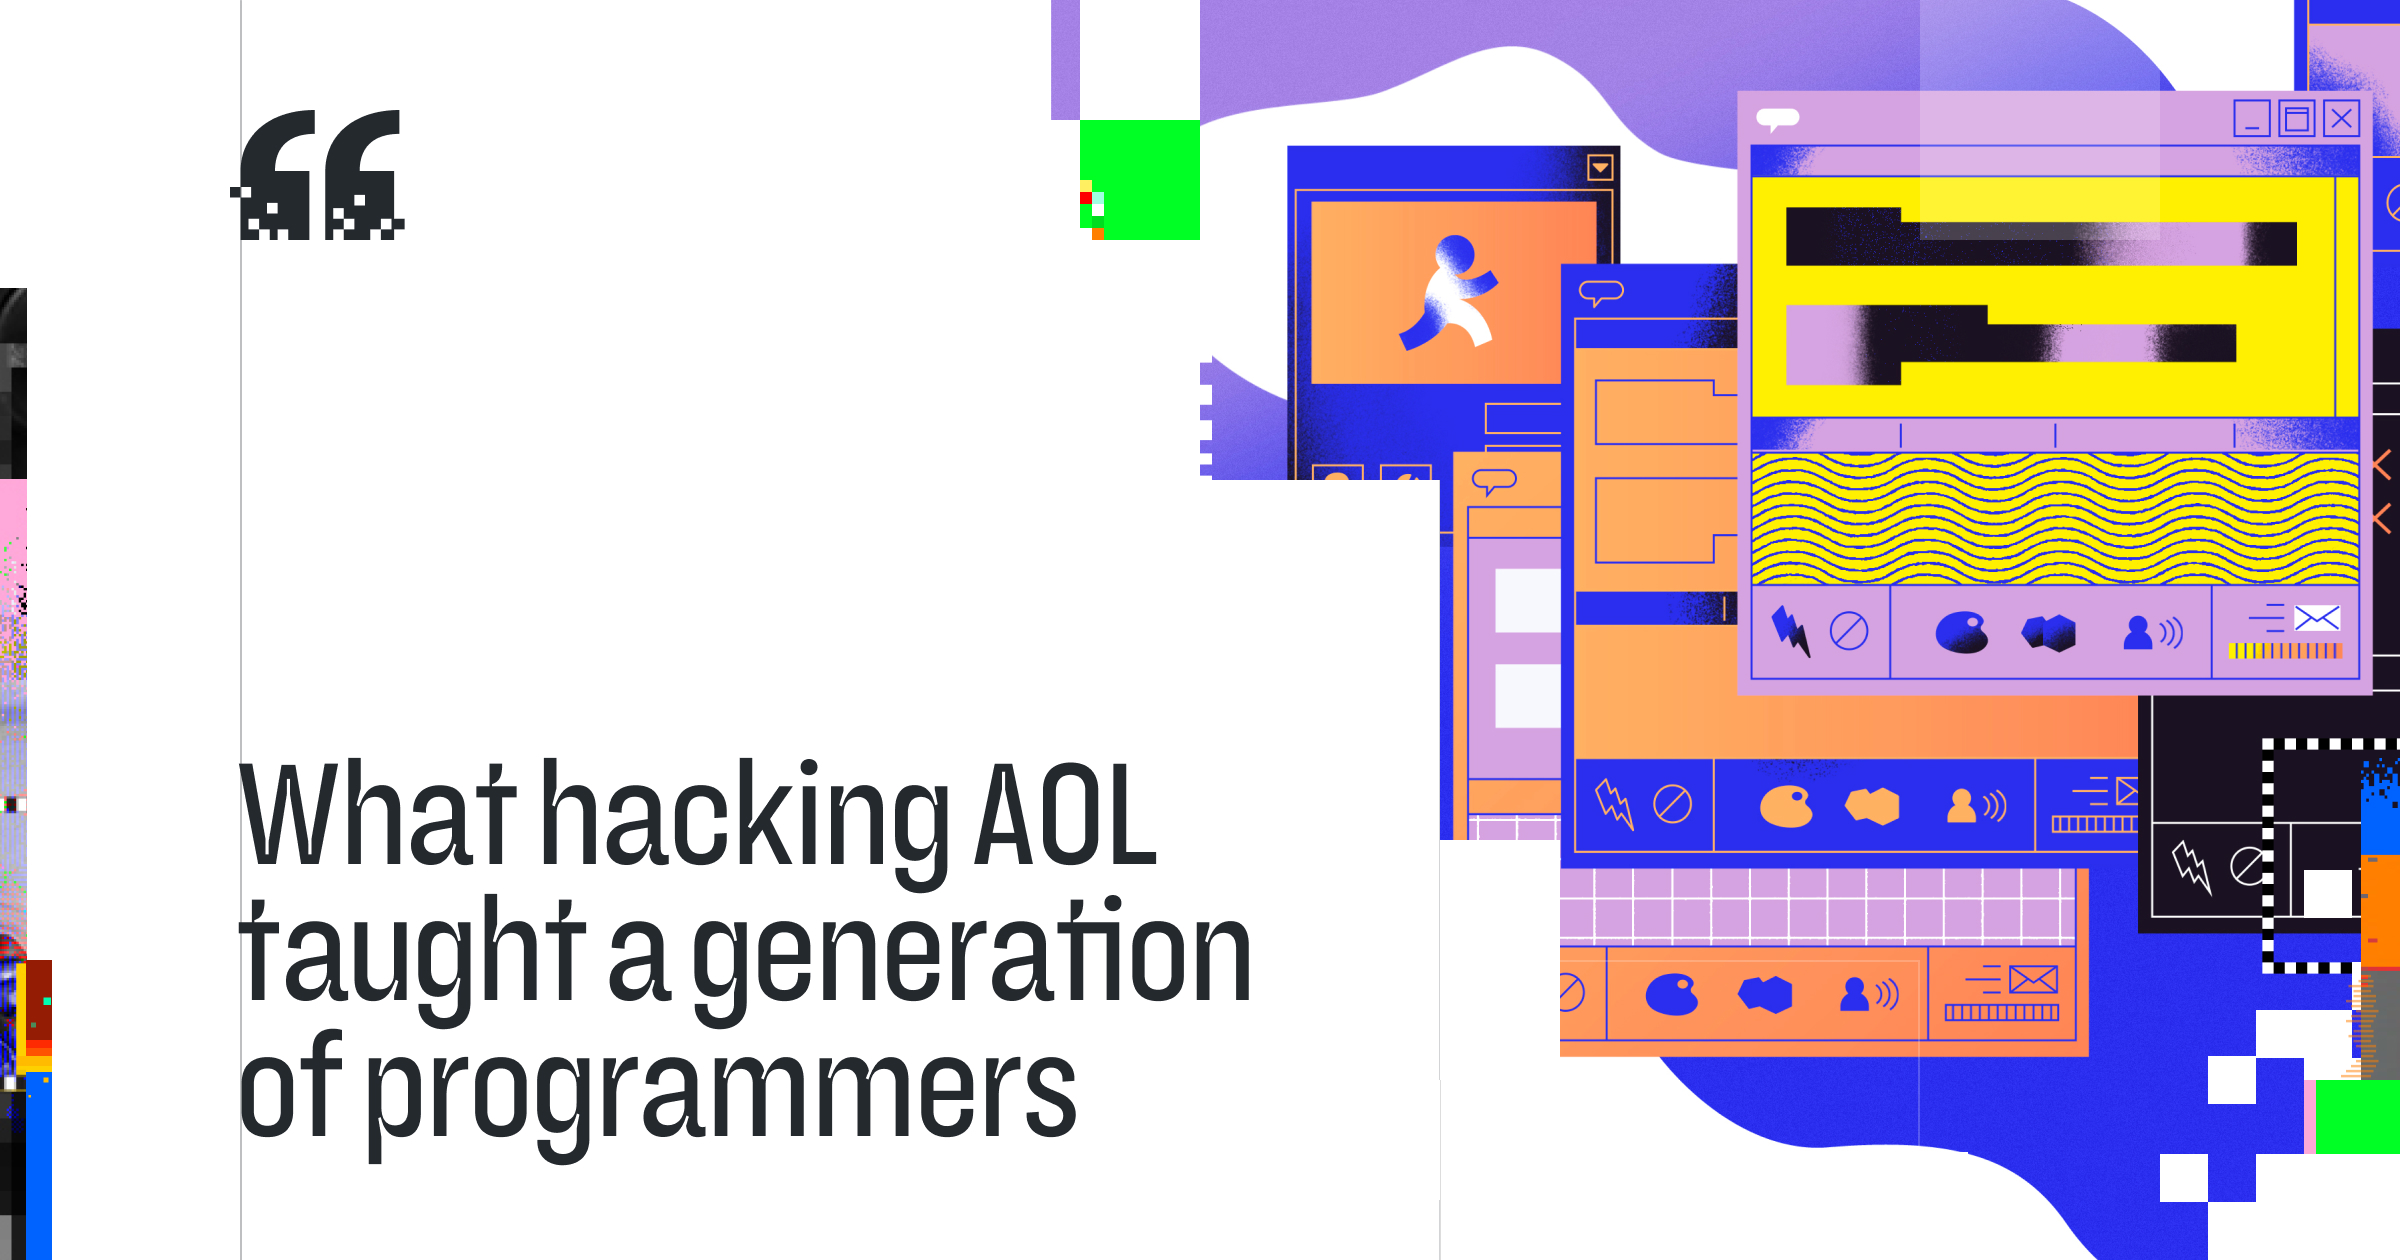 GitHub ReadME Featured Article: What Hacking AOL Taught a Generation of Programmers